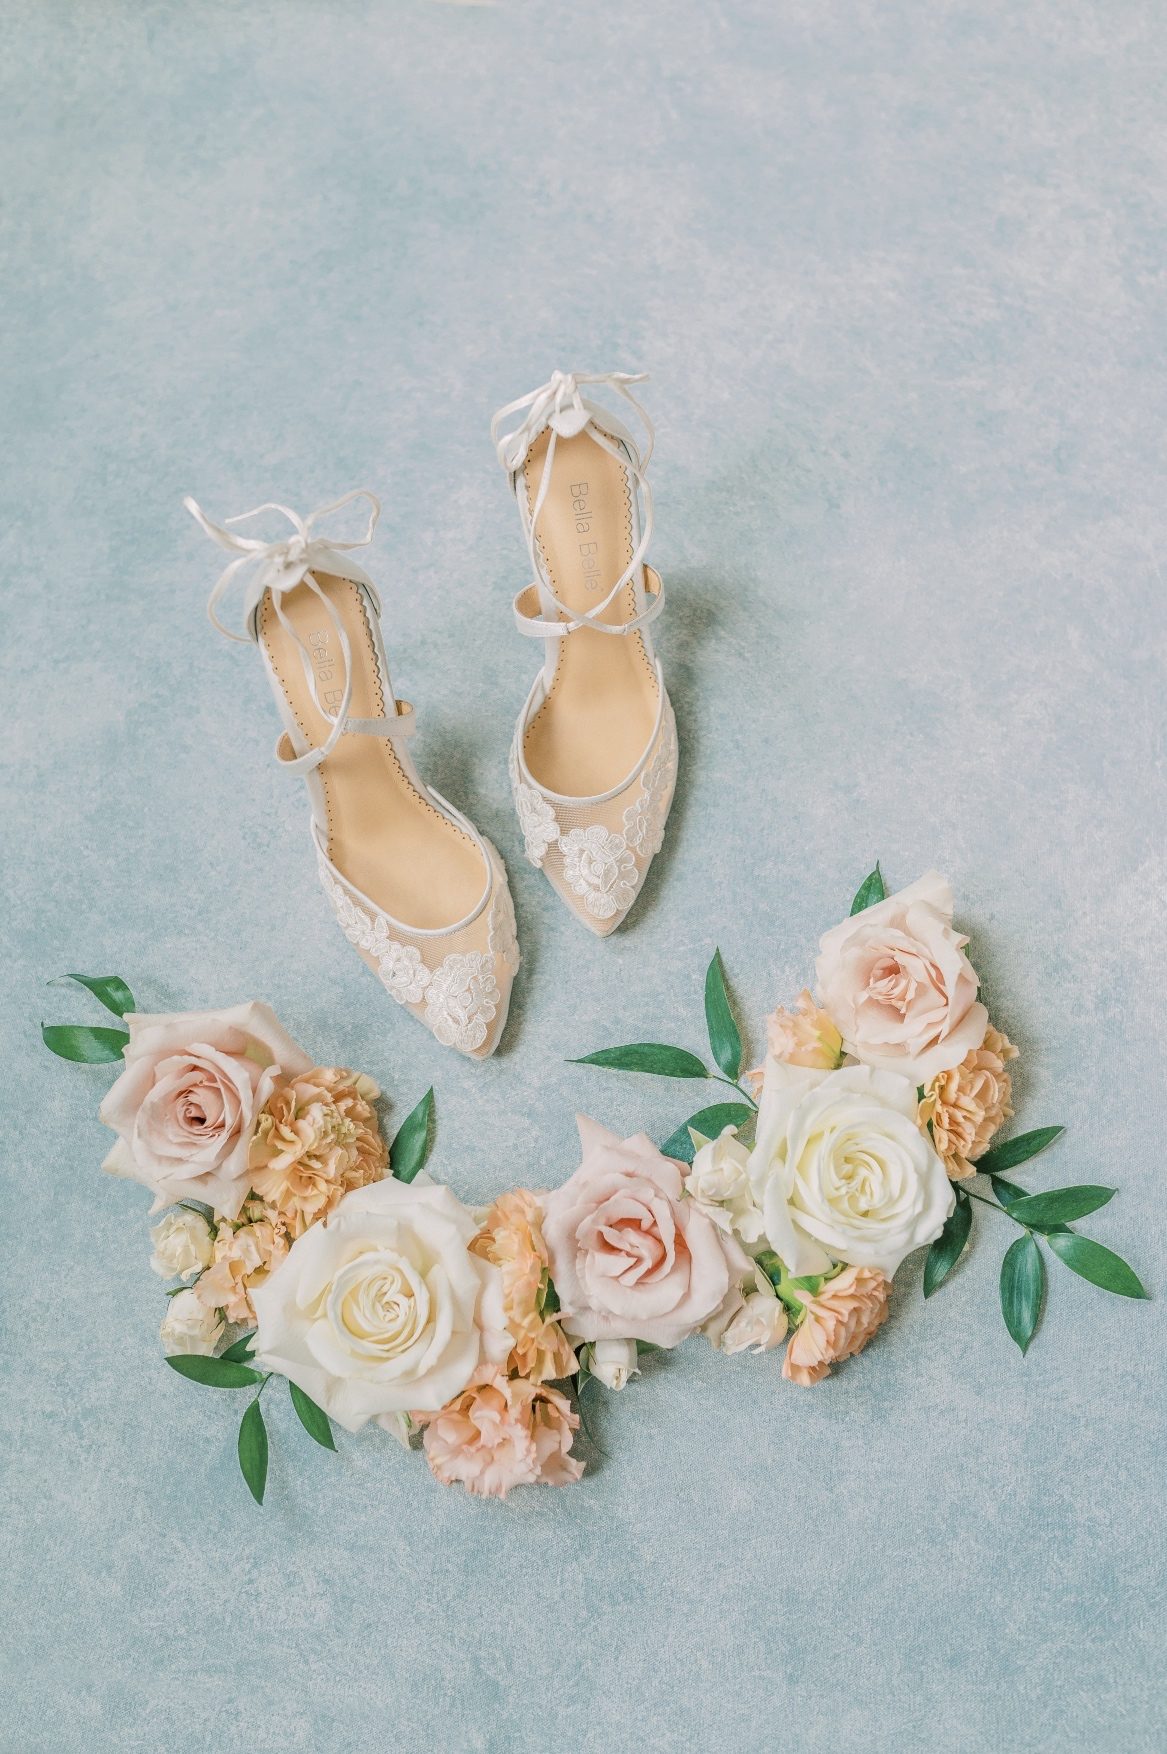 A semi circle cluster of pretty white, peach and blush blooms and the bridal shoes